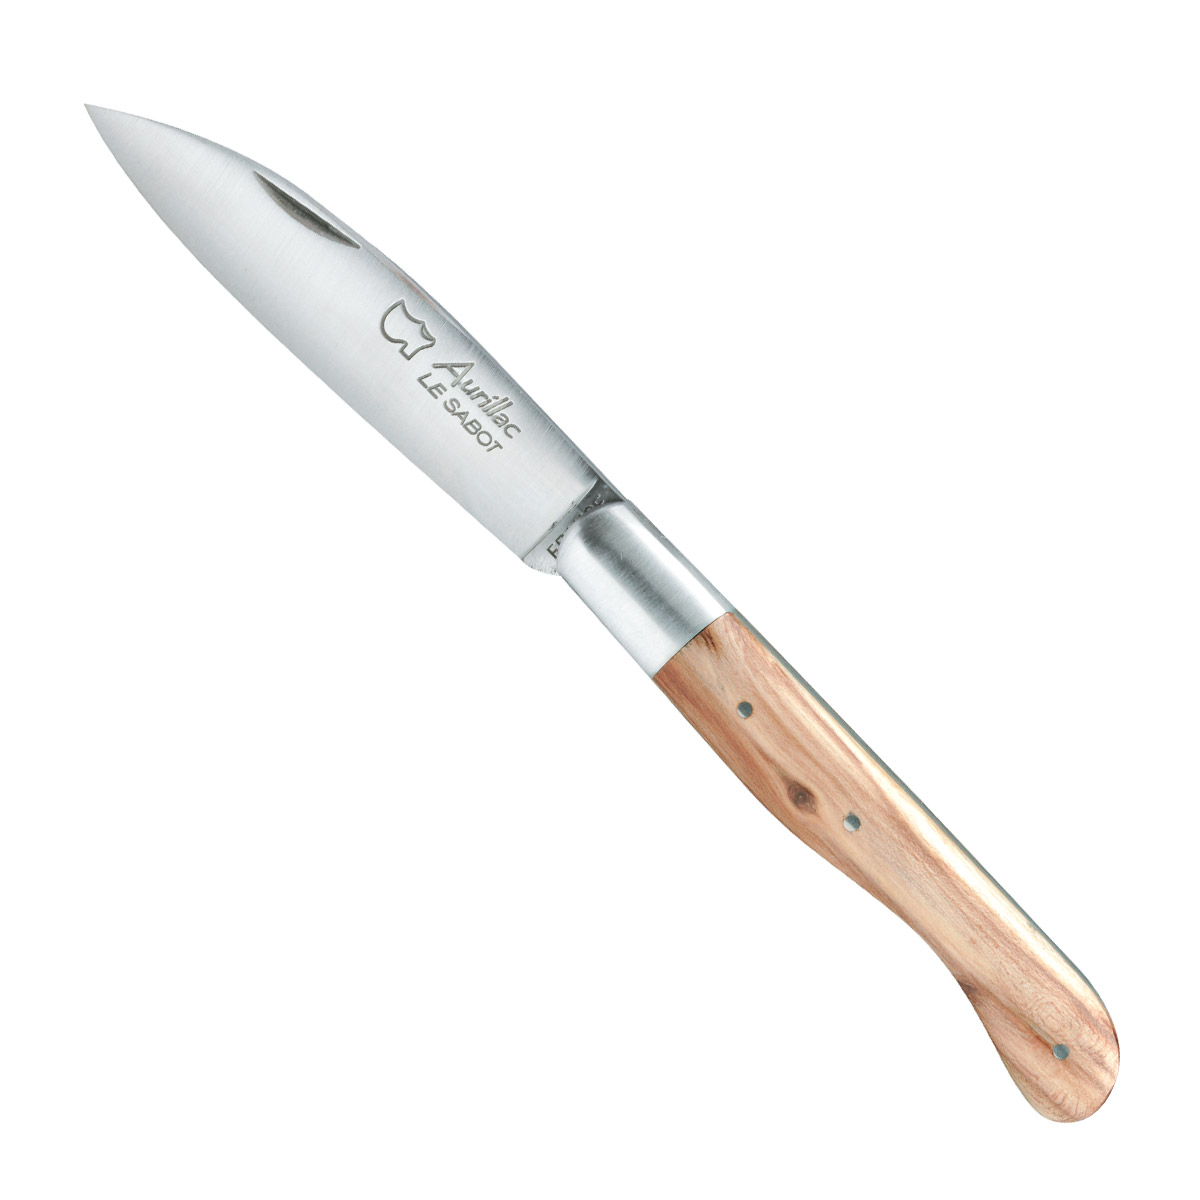 Small kitchen knives - Intensives Collection - Coutellerie Au Sabot